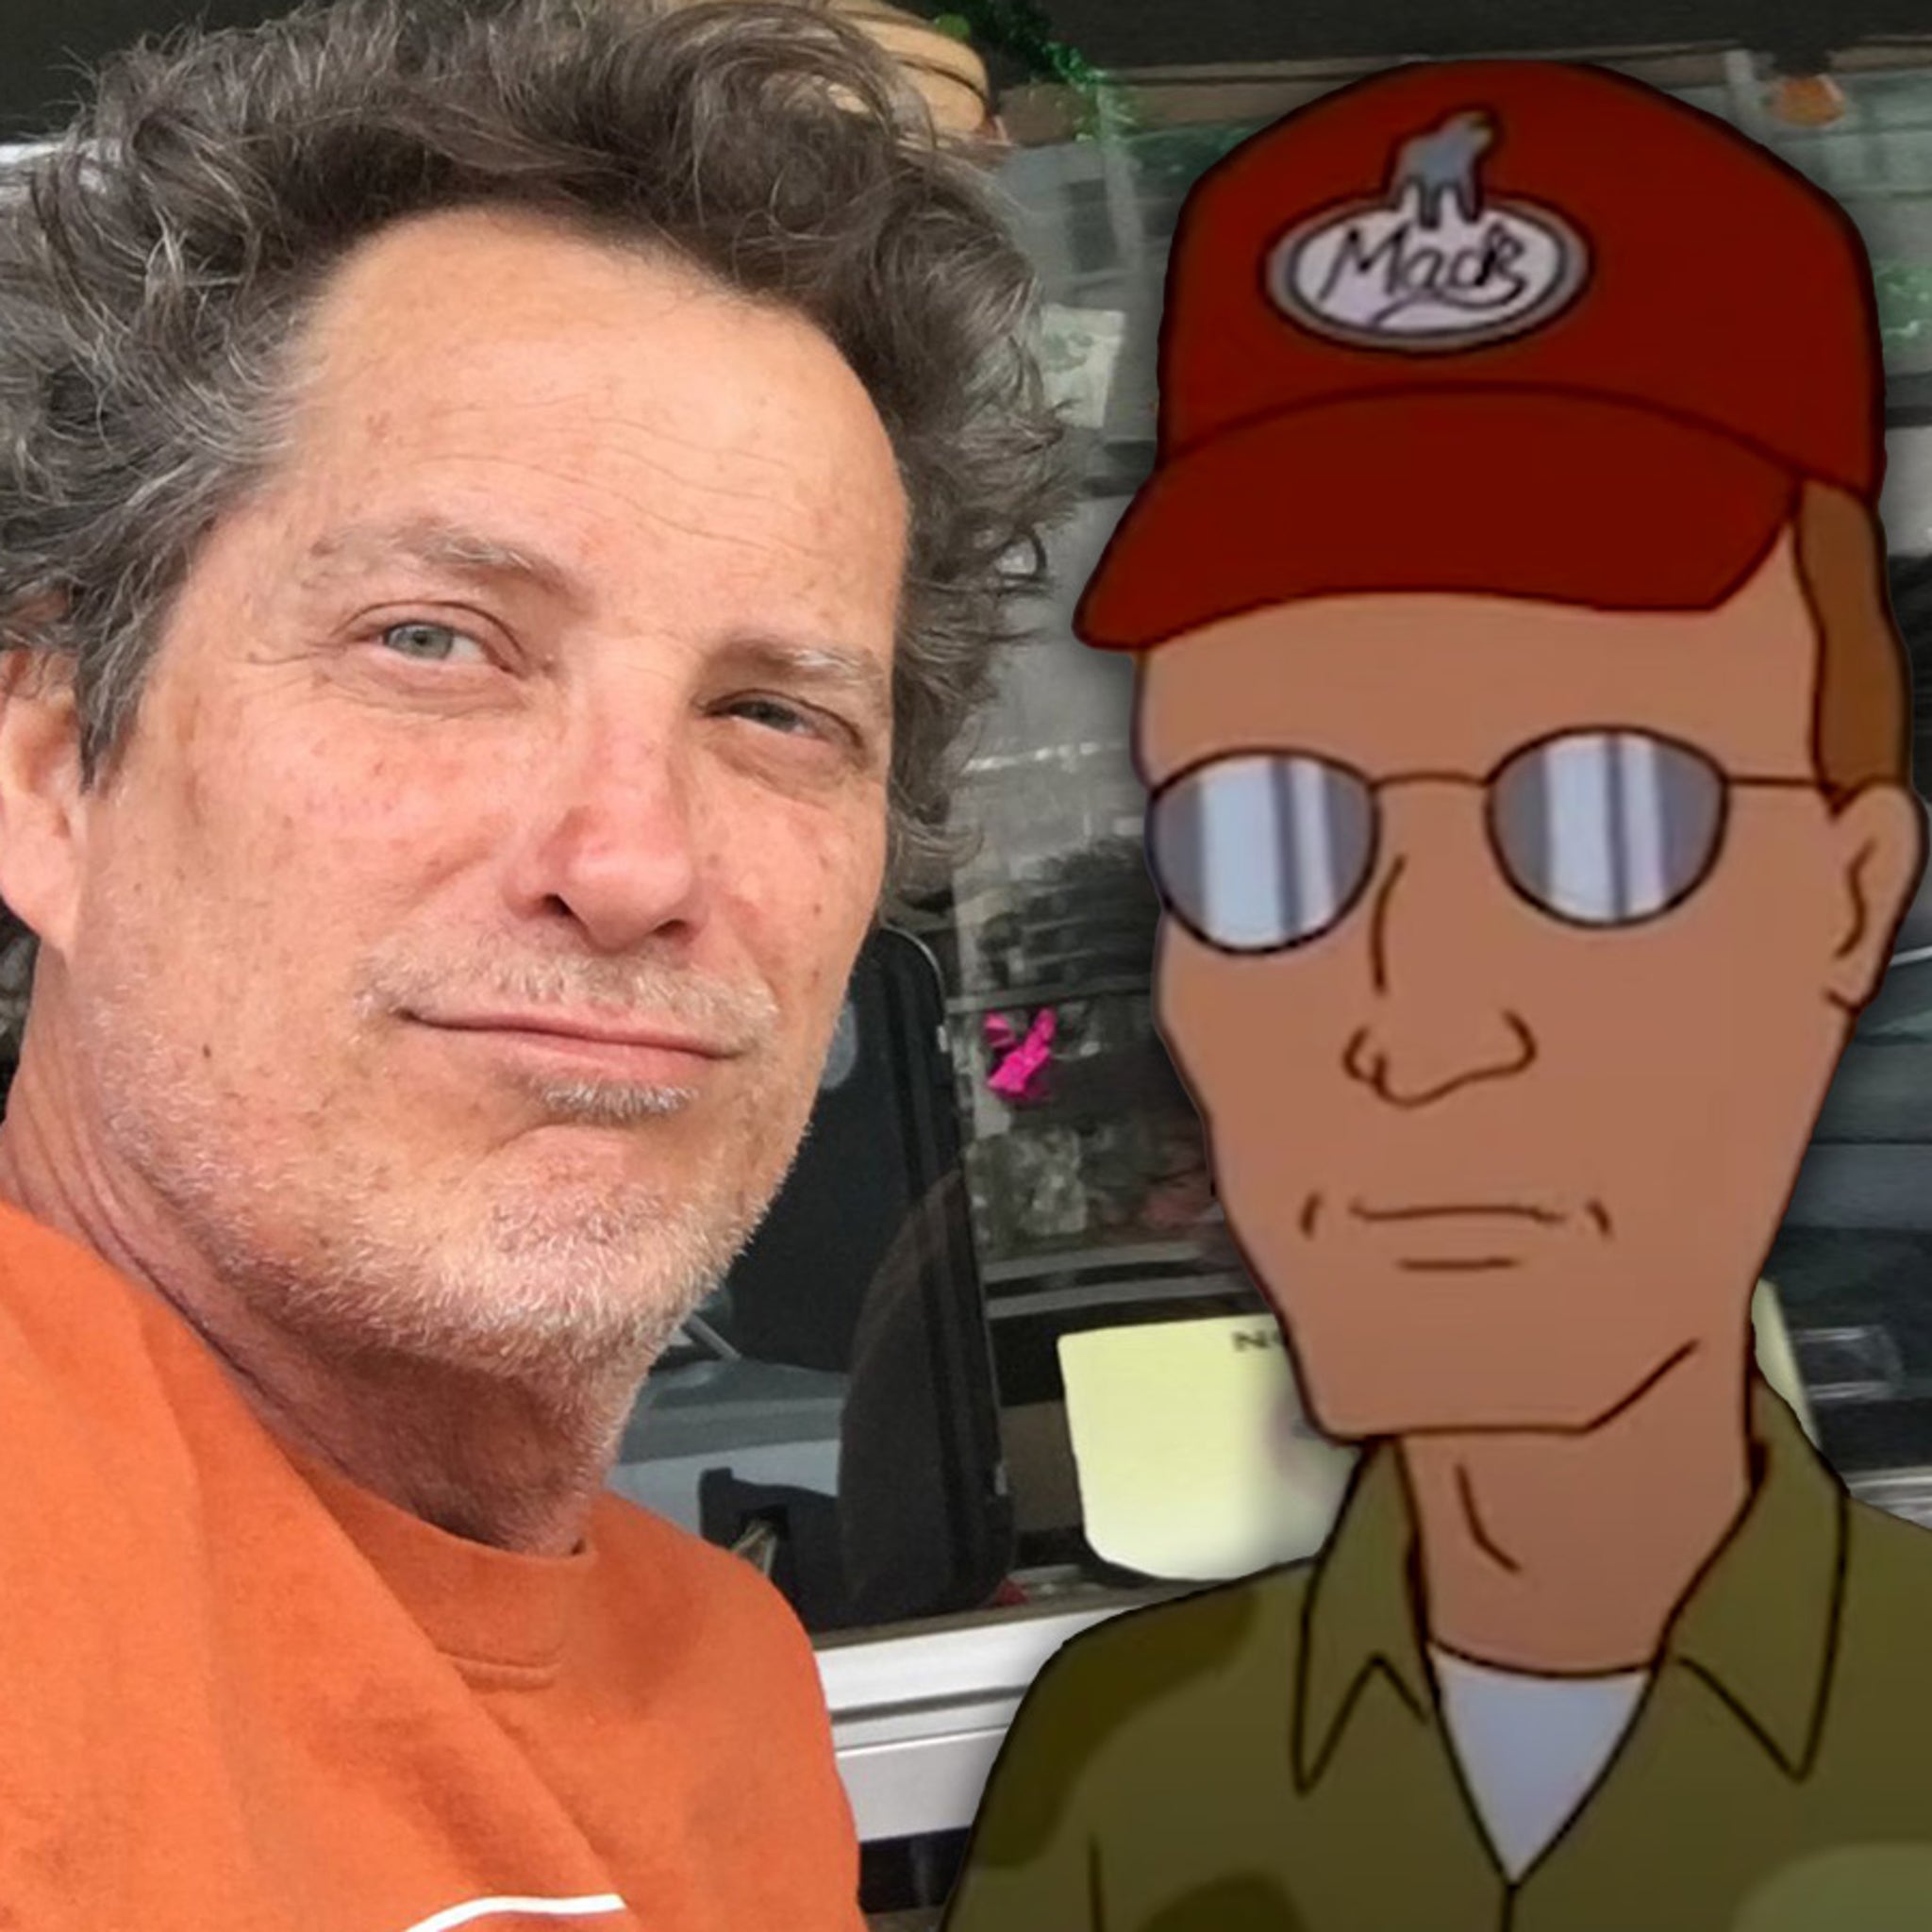 Dale voice actor Johnny Hardwick recorded new episodes for King